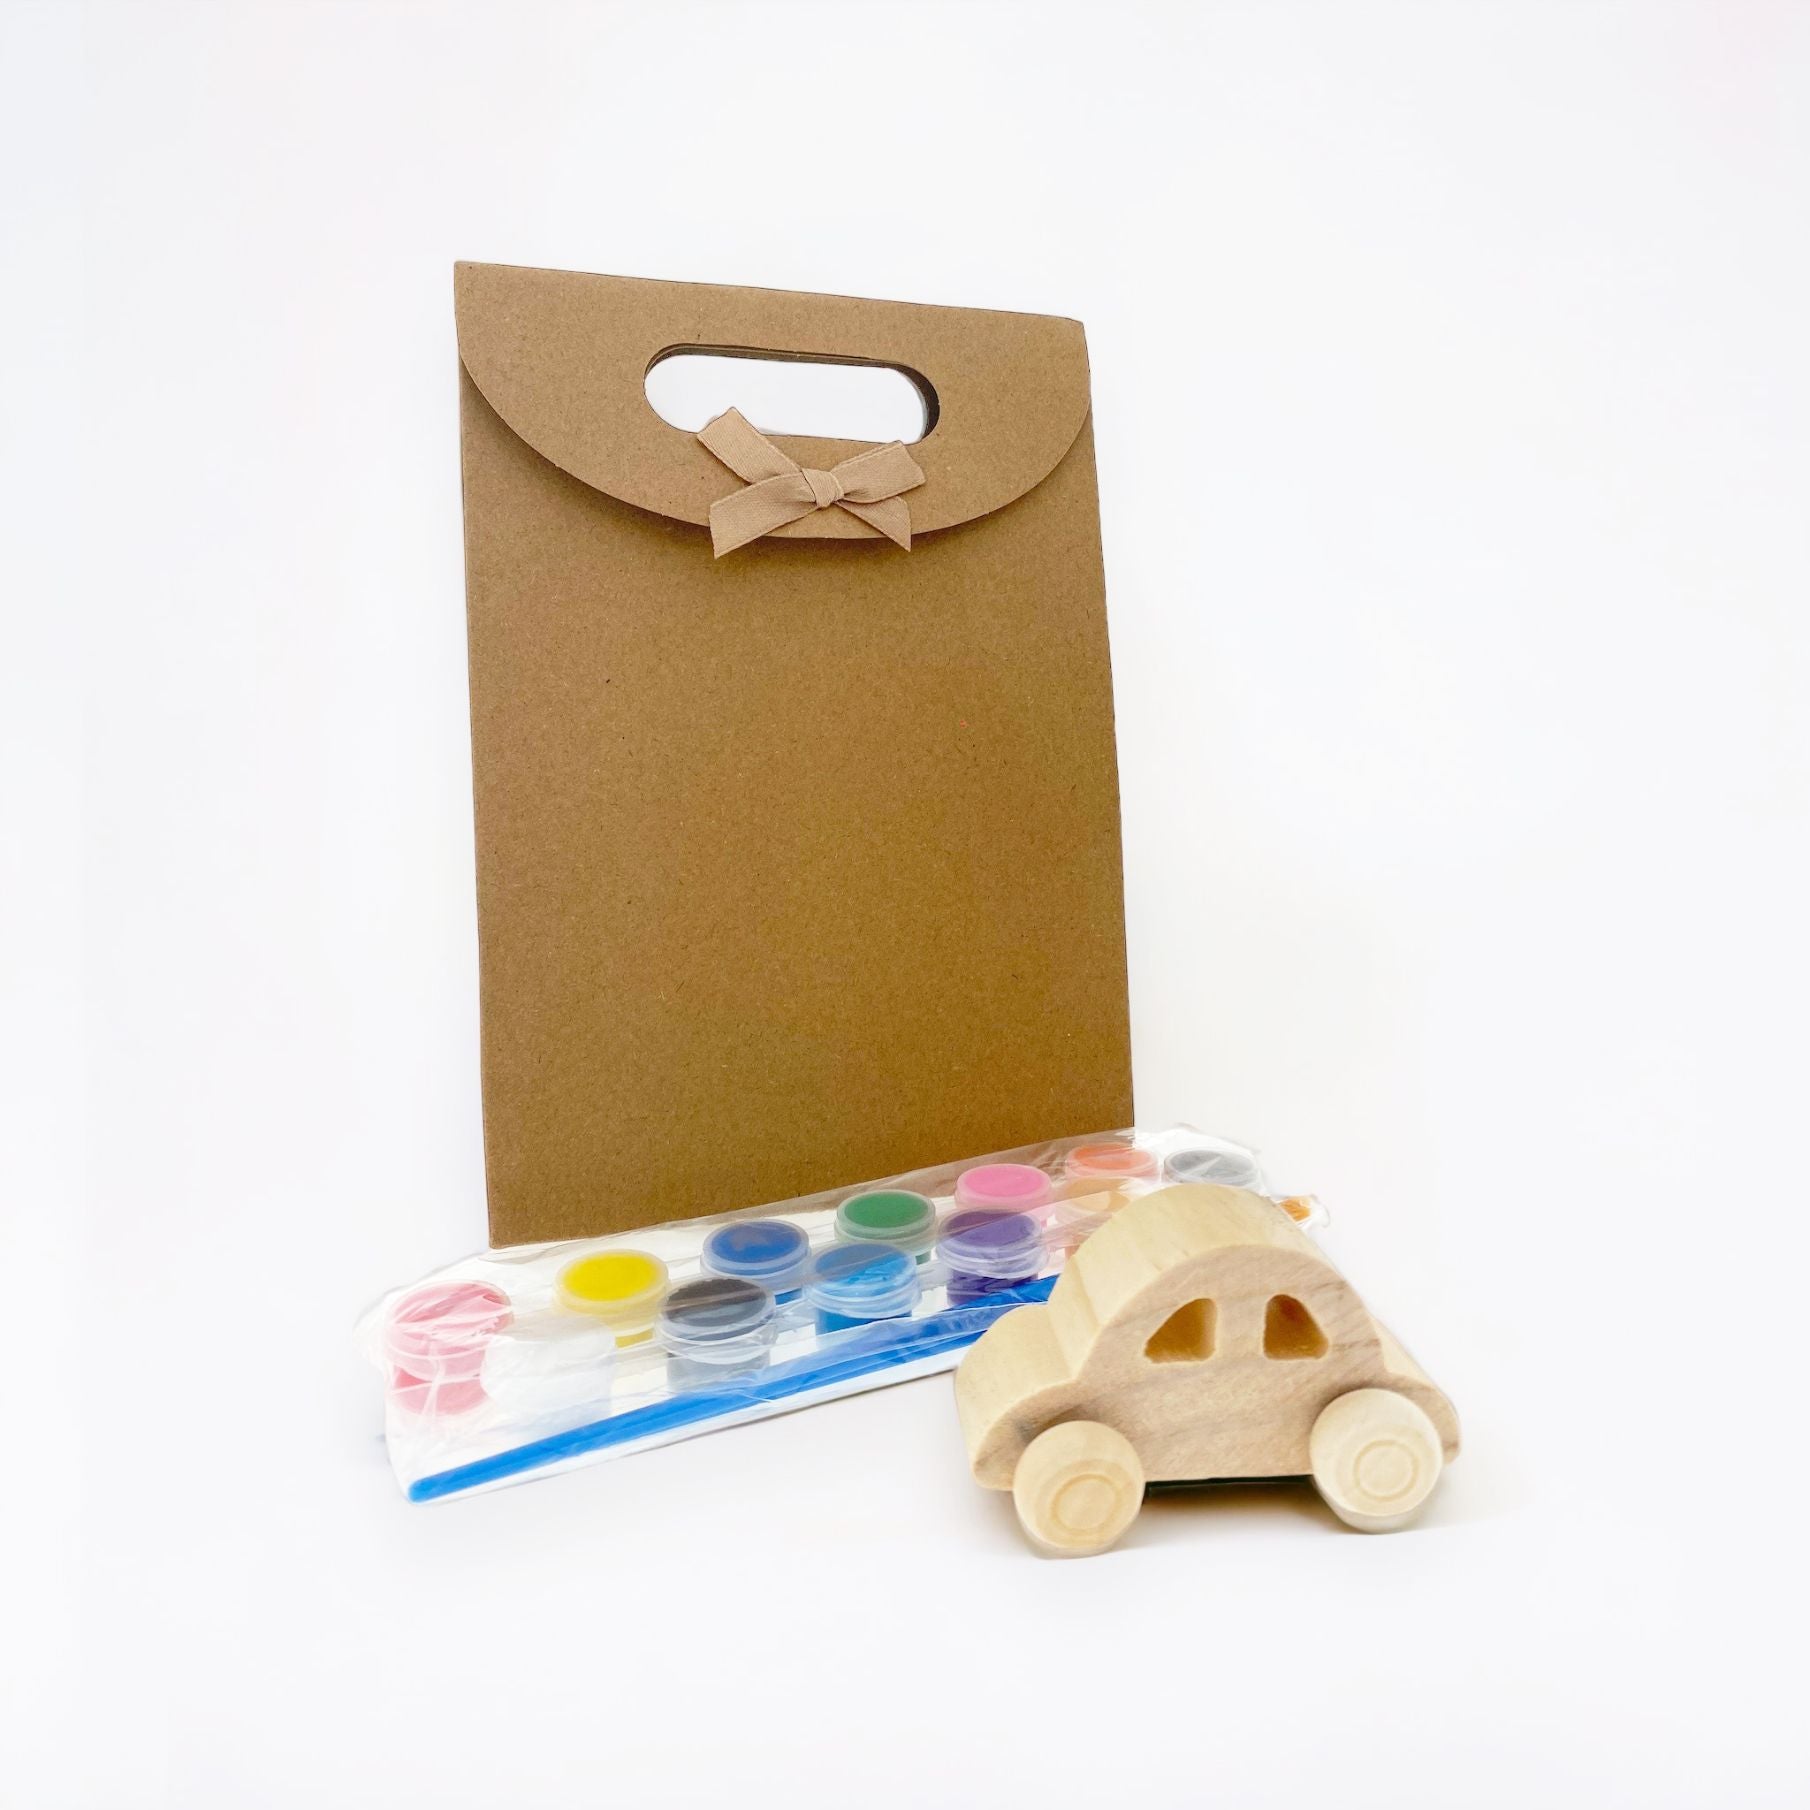 Wooden DIY cars party pack. Paint your own vehicle. Children Art Creativity Kit